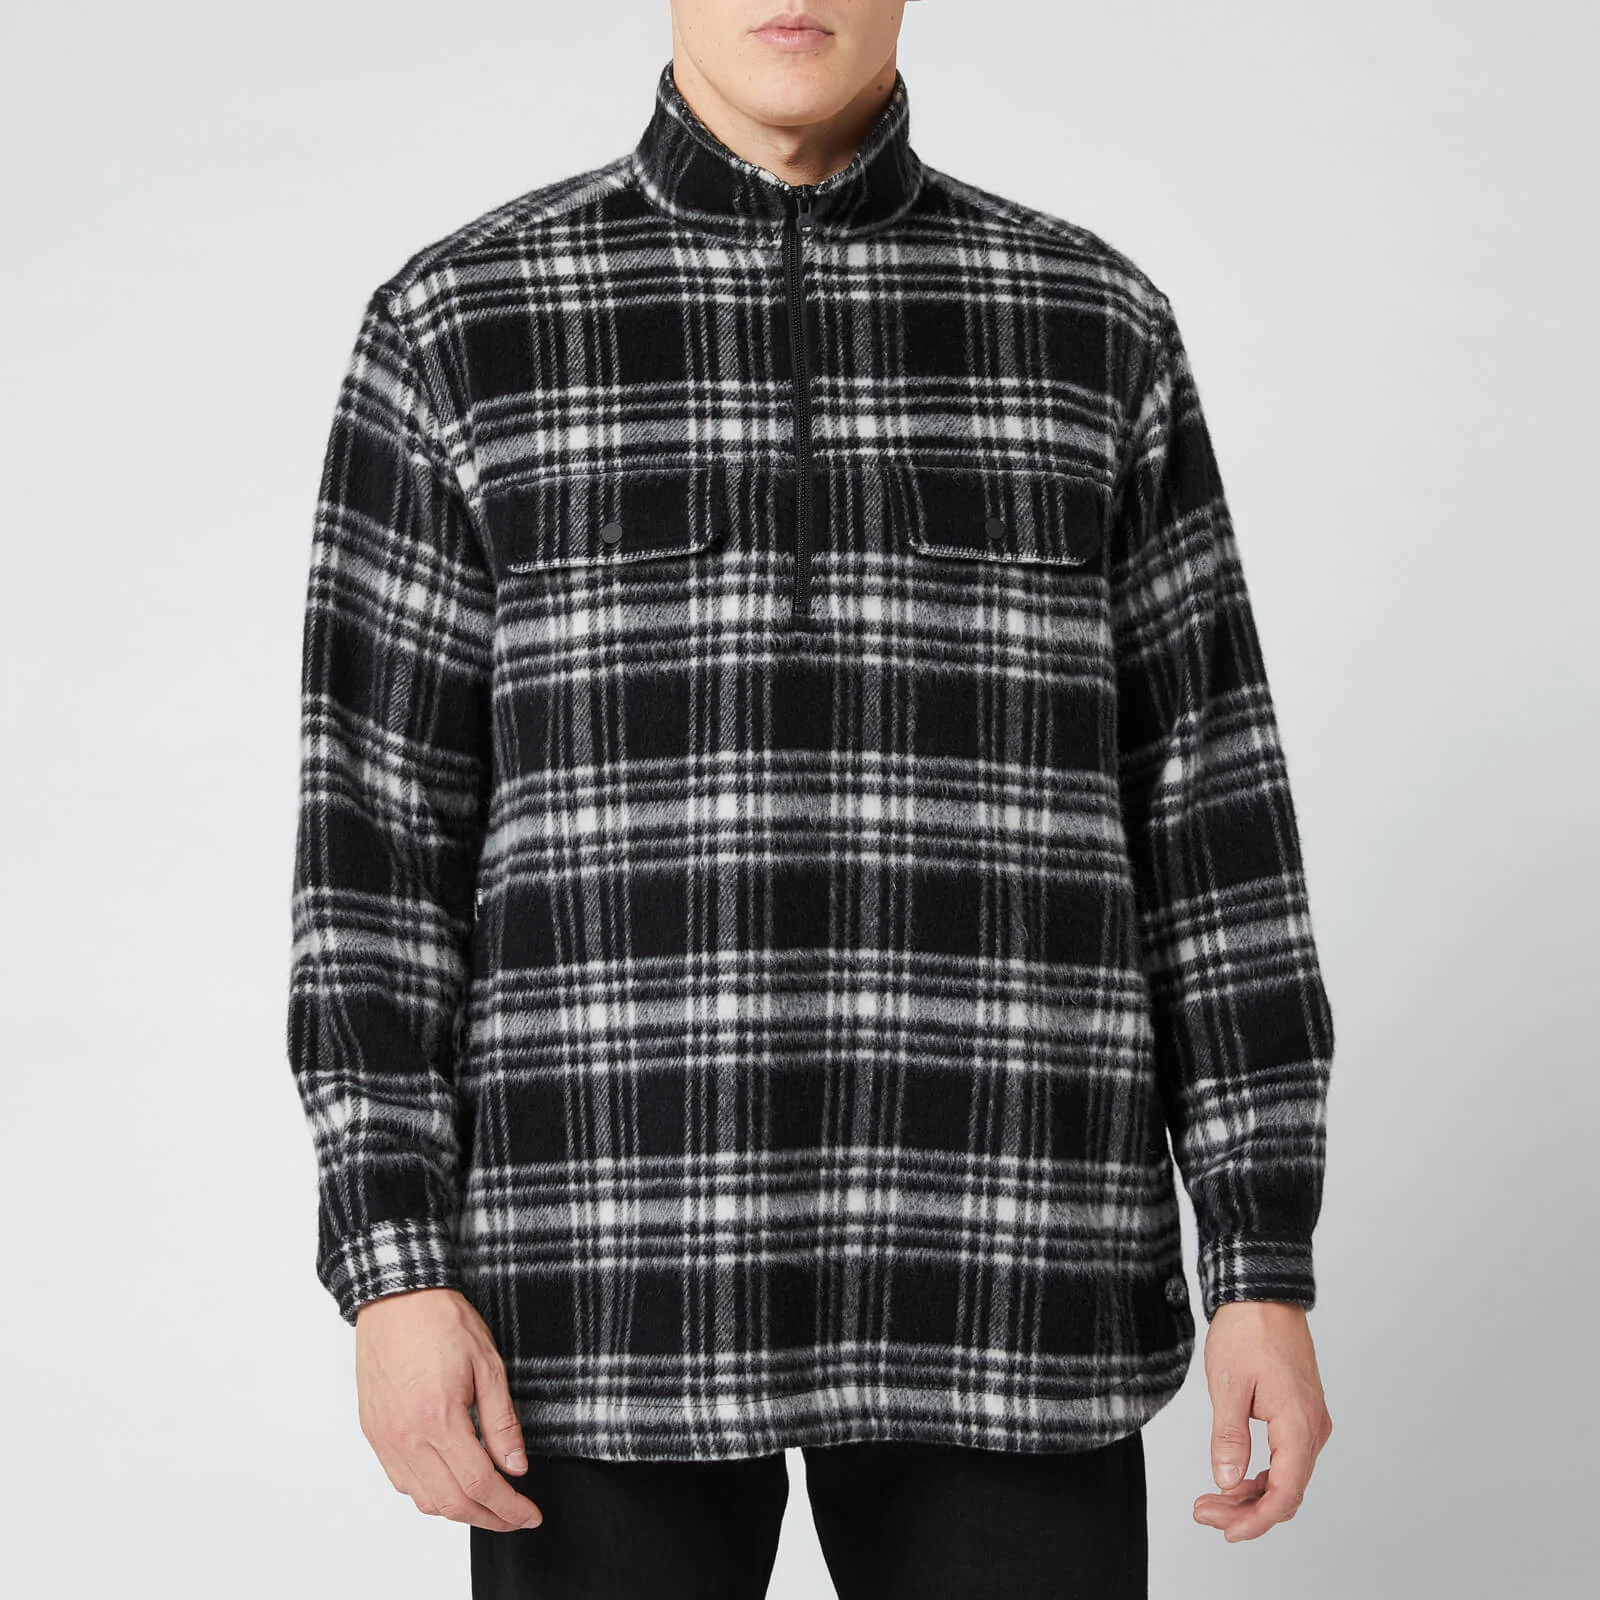 White Mountaineering Men's Check Shaggy Big Pullover Shirt - Black Image 1